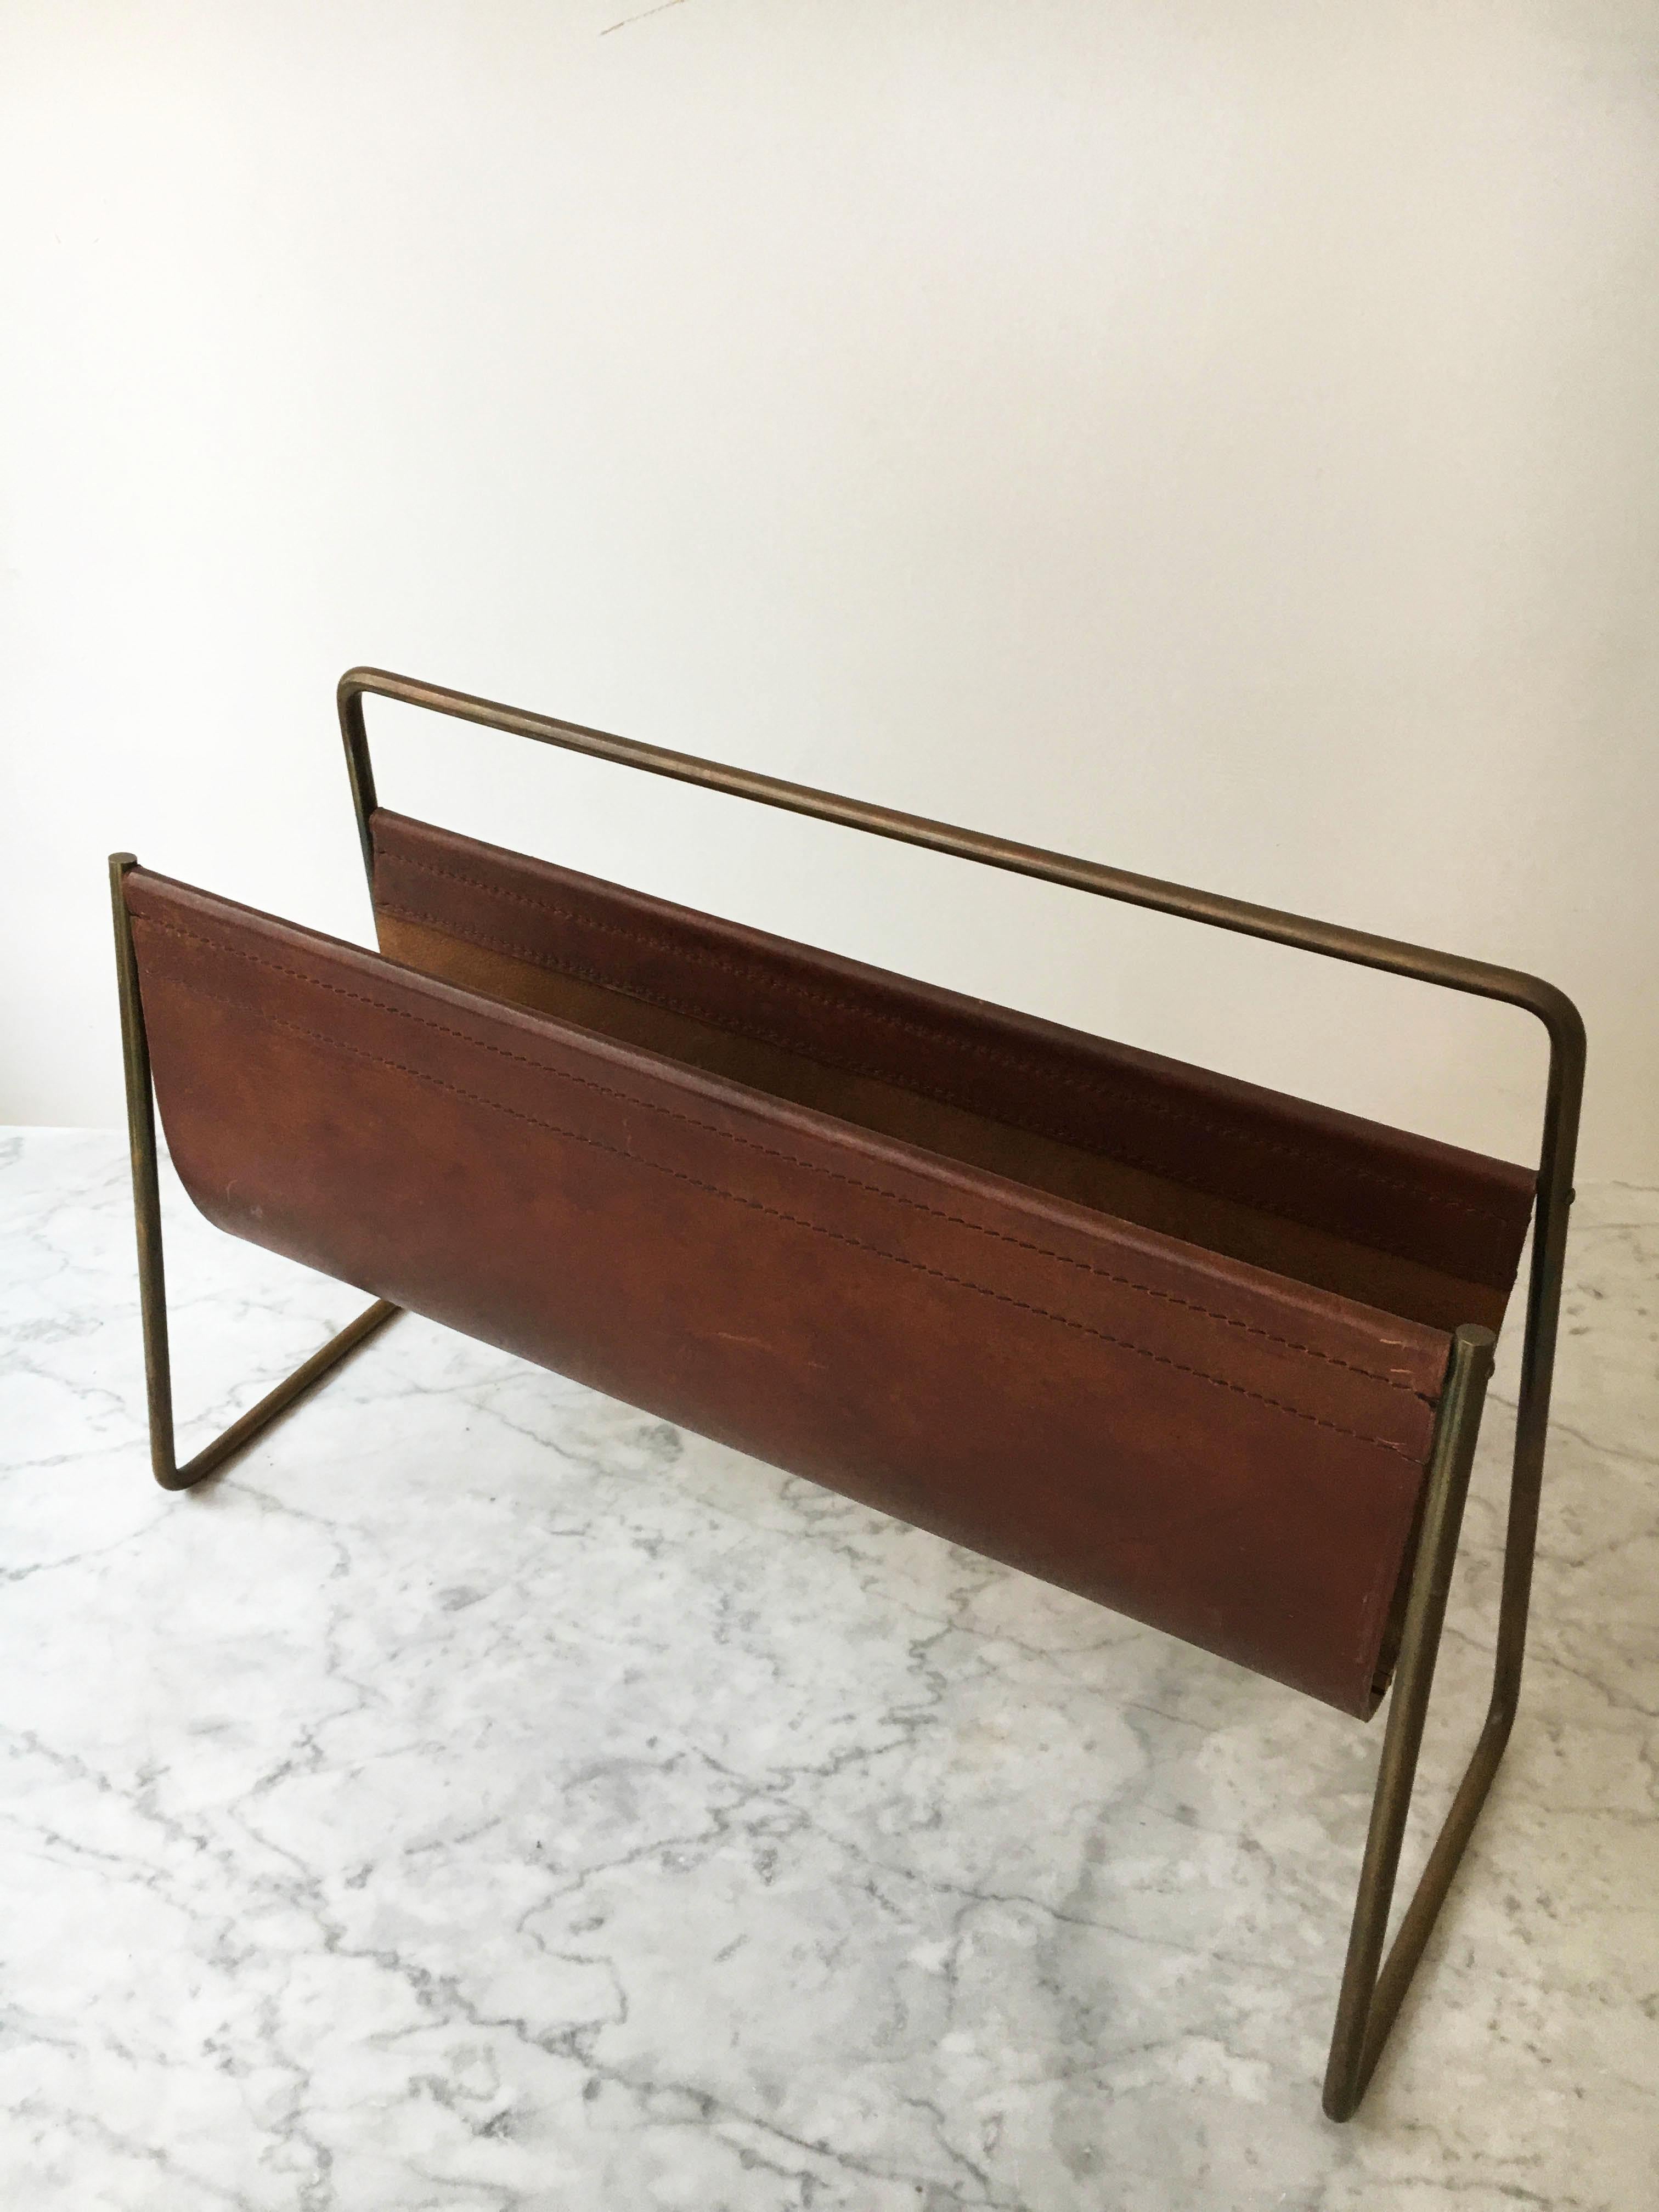 Carl Auböck Large Leather Magazine Stand, Austria, 1950s (Messing) im Angebot